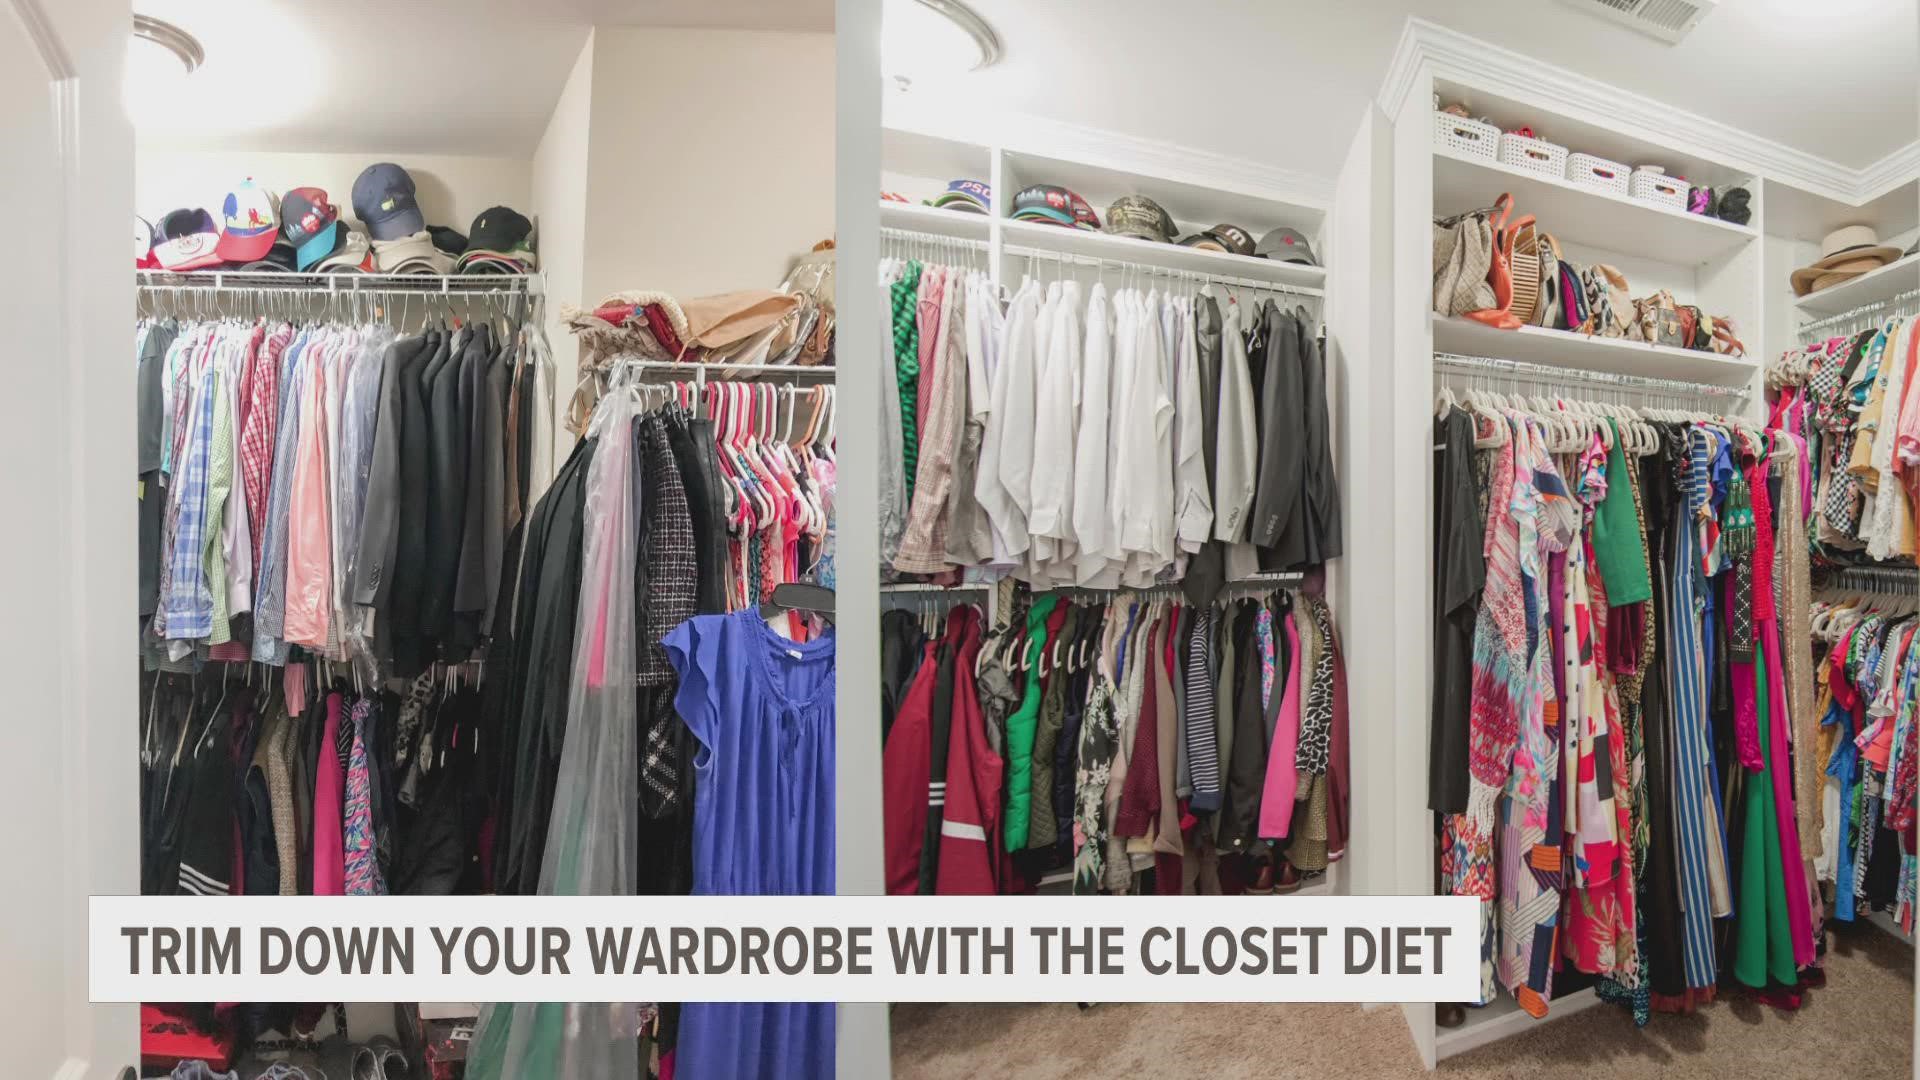 Everyone talks about losing weight at the beginning of the new year, but what about losing weight in your wardrobe?